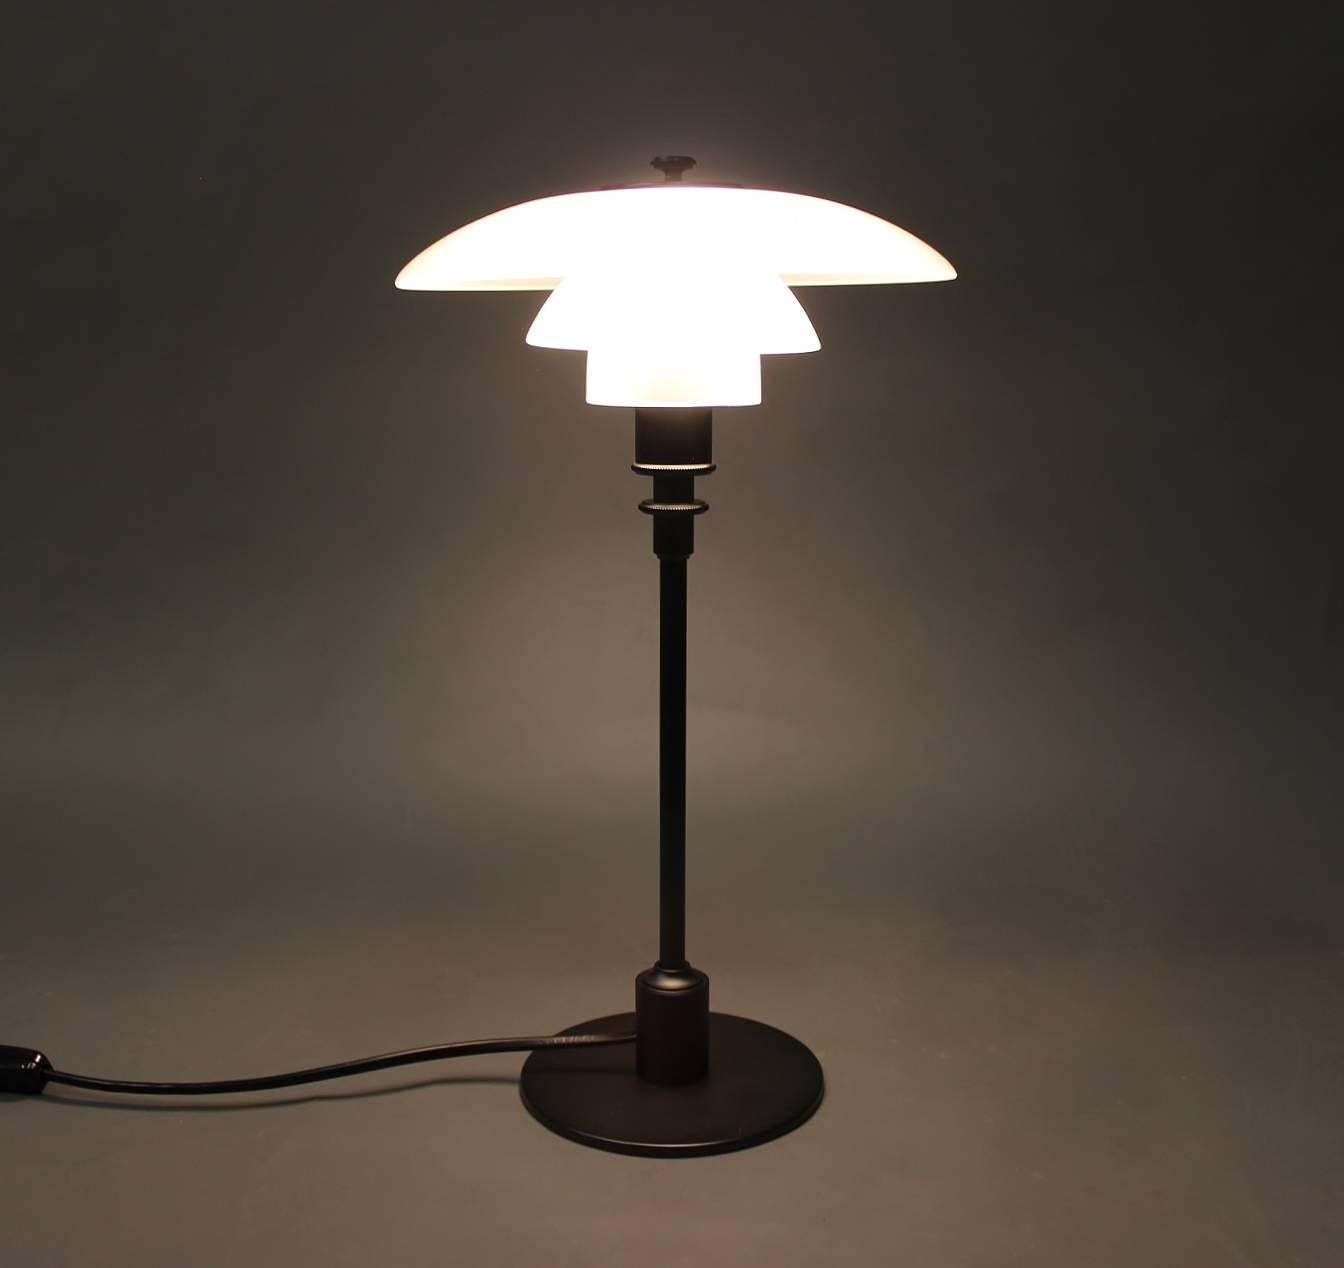 PH 2/1 table lamp, anniversary model, designed by Poul Henningsen and manufactured by Louis Poulsen, 2010s. The lamp is with shades of matte opaline glass and black lacquered frame.